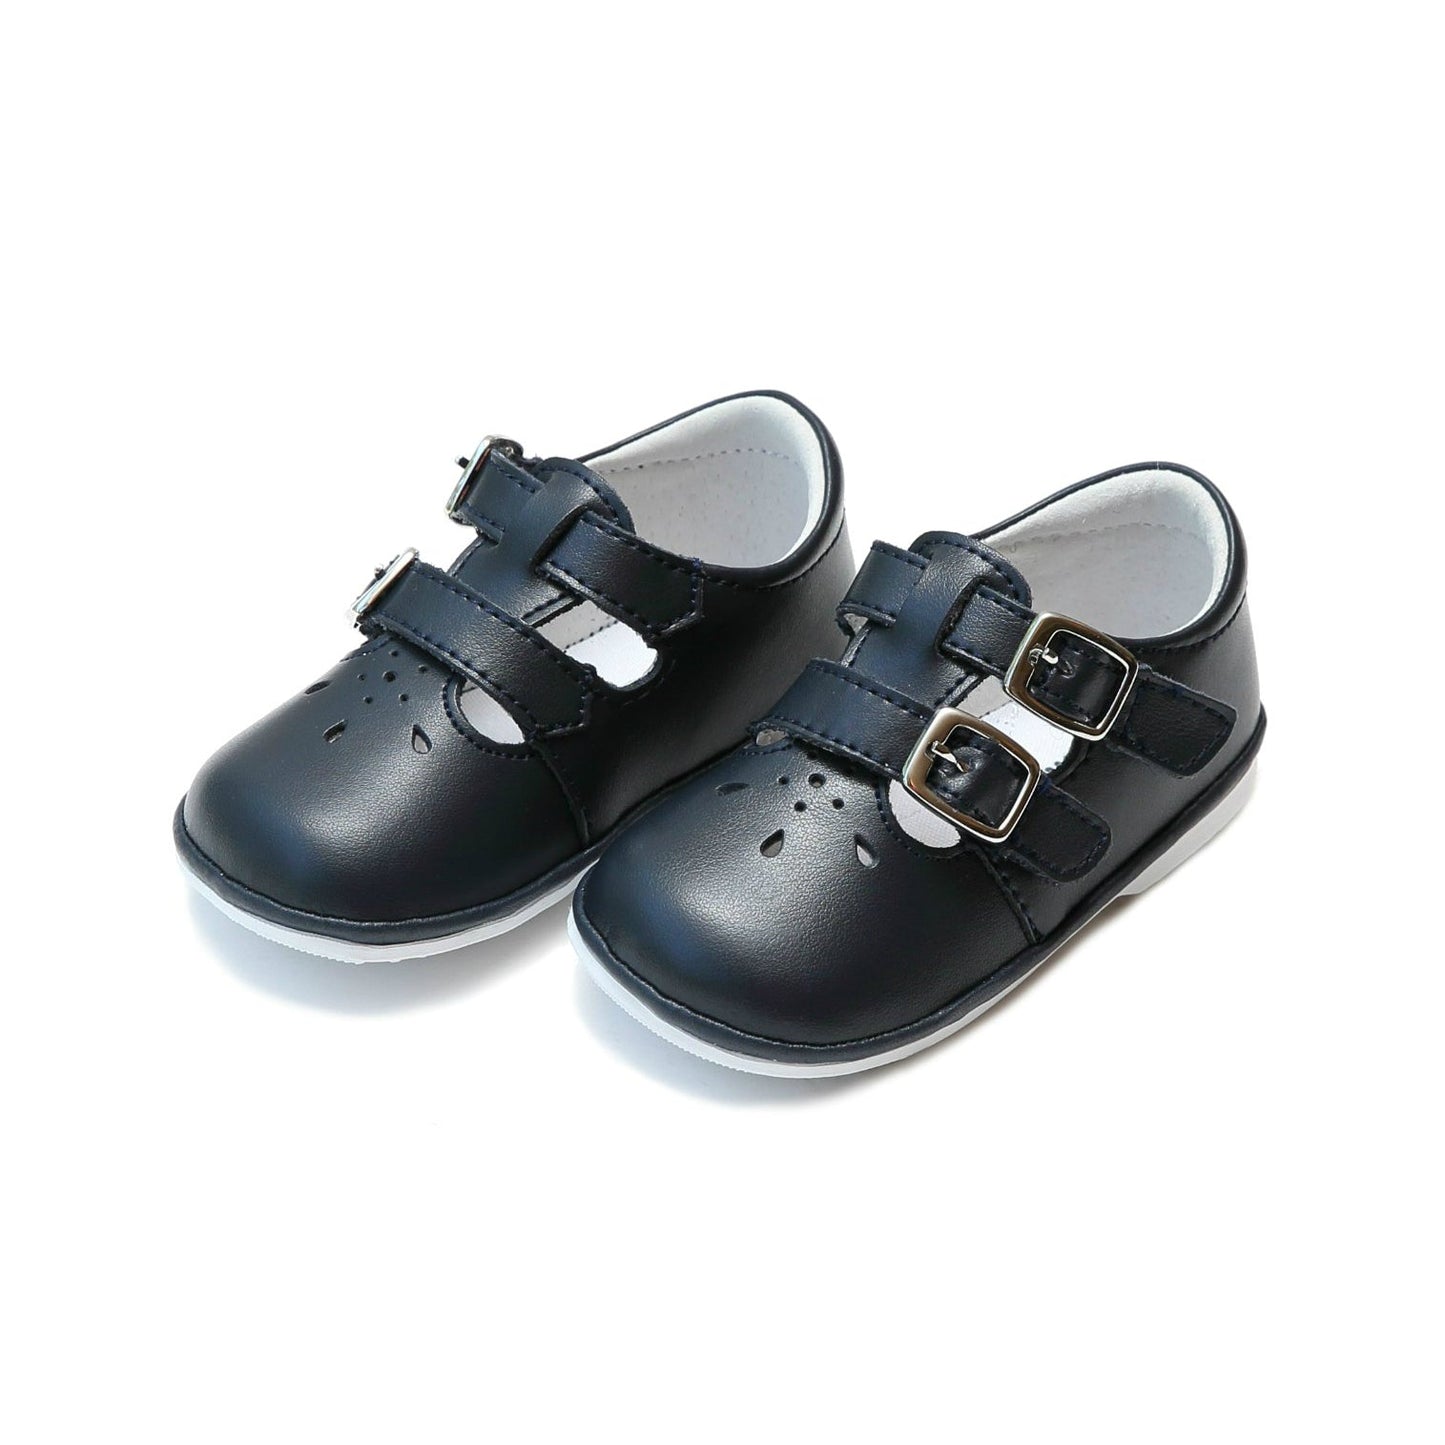 L'Amour Hattie Double Buckle Leather Mary Jane - Babies & Toddlers Mary Janes